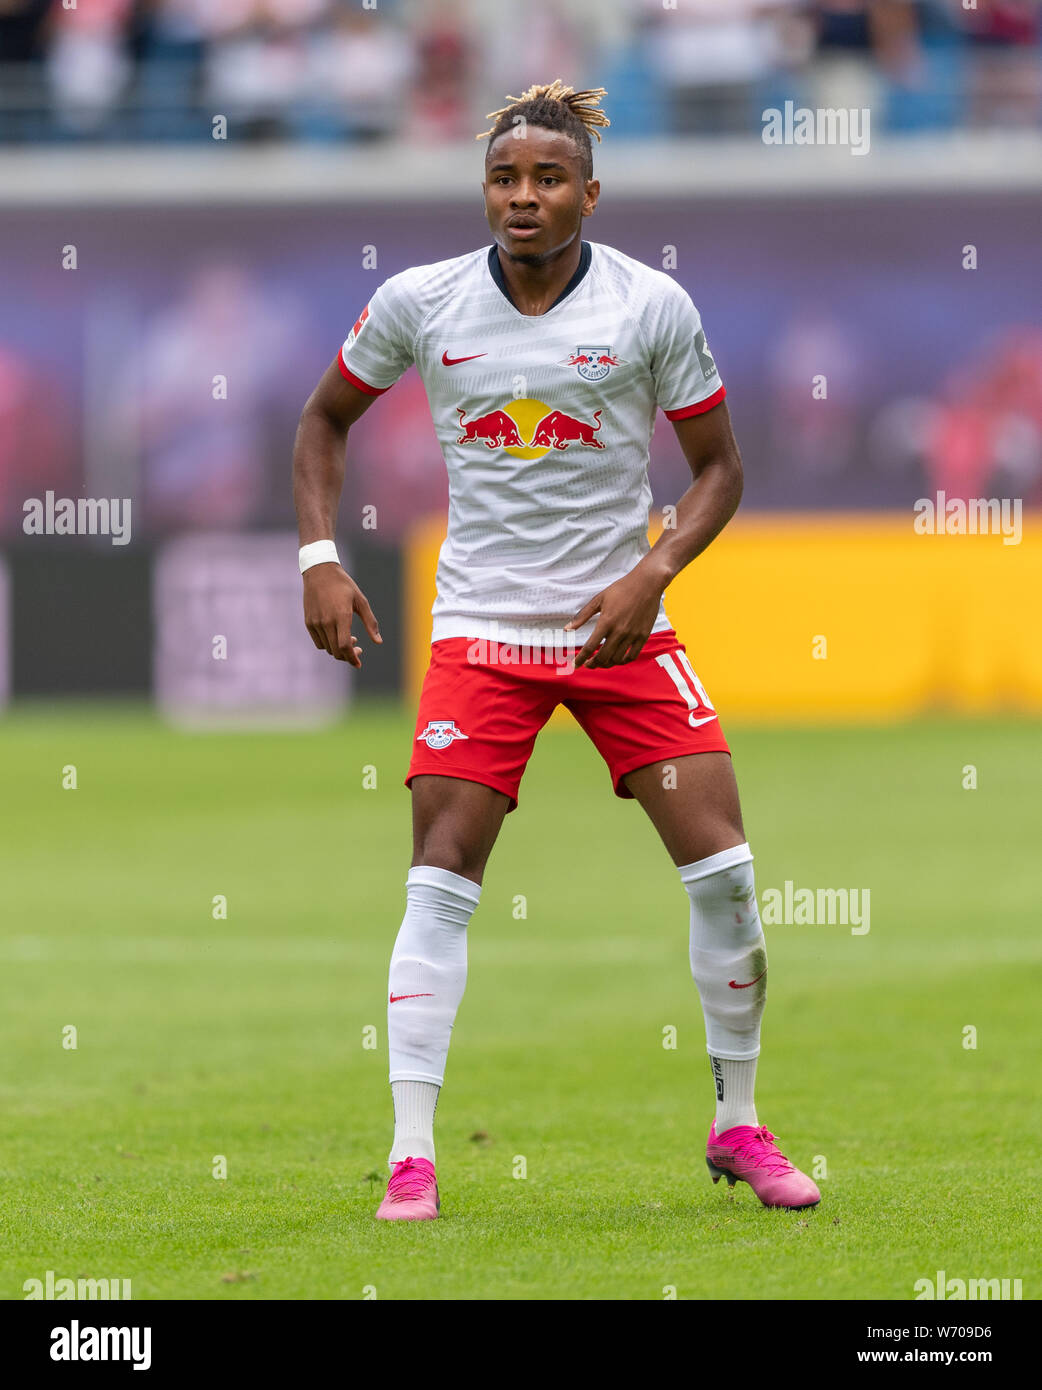 Leipzig, Germany. 03rd Aug, 2019. Soccer: Test match, RB Leipzig - Aston  Villa, in the Red Bull Arena in Leipzig. Christopher Nkunku from Leipzig.  Credit: Robert Michael/dpa-Zentralbild/dpa/Alamy Live News Stock Photo -